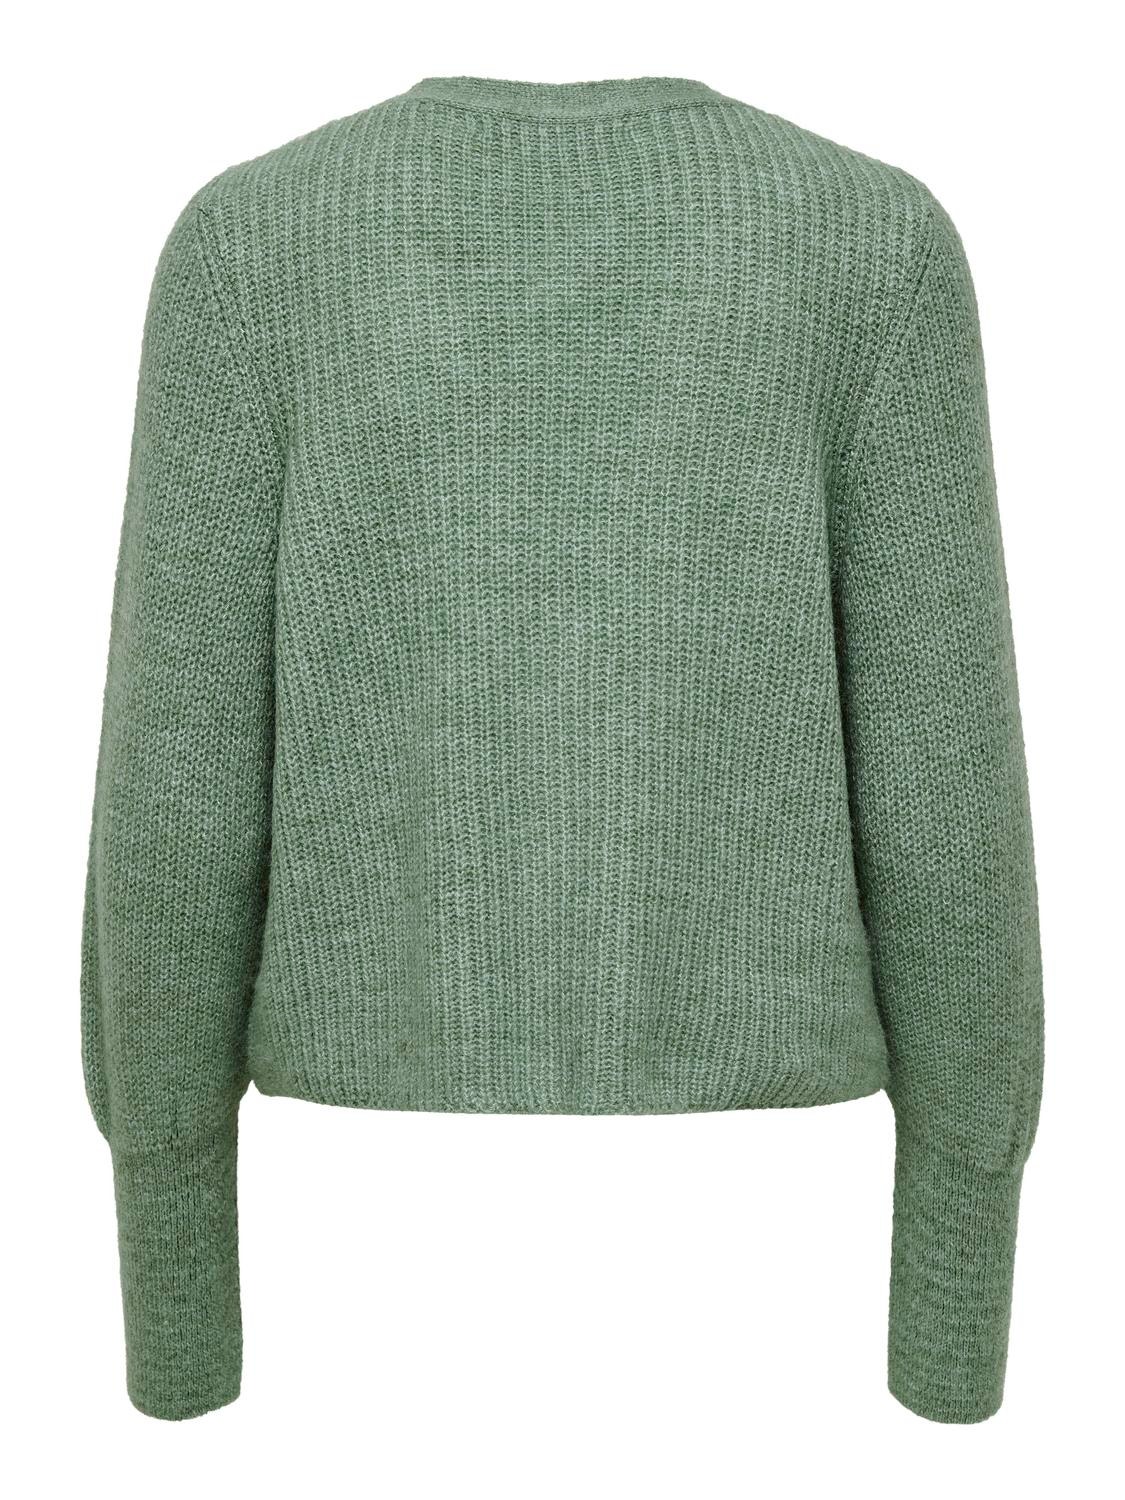 ONLY Rib Knitted Cardigan -Granite Green - 15209307